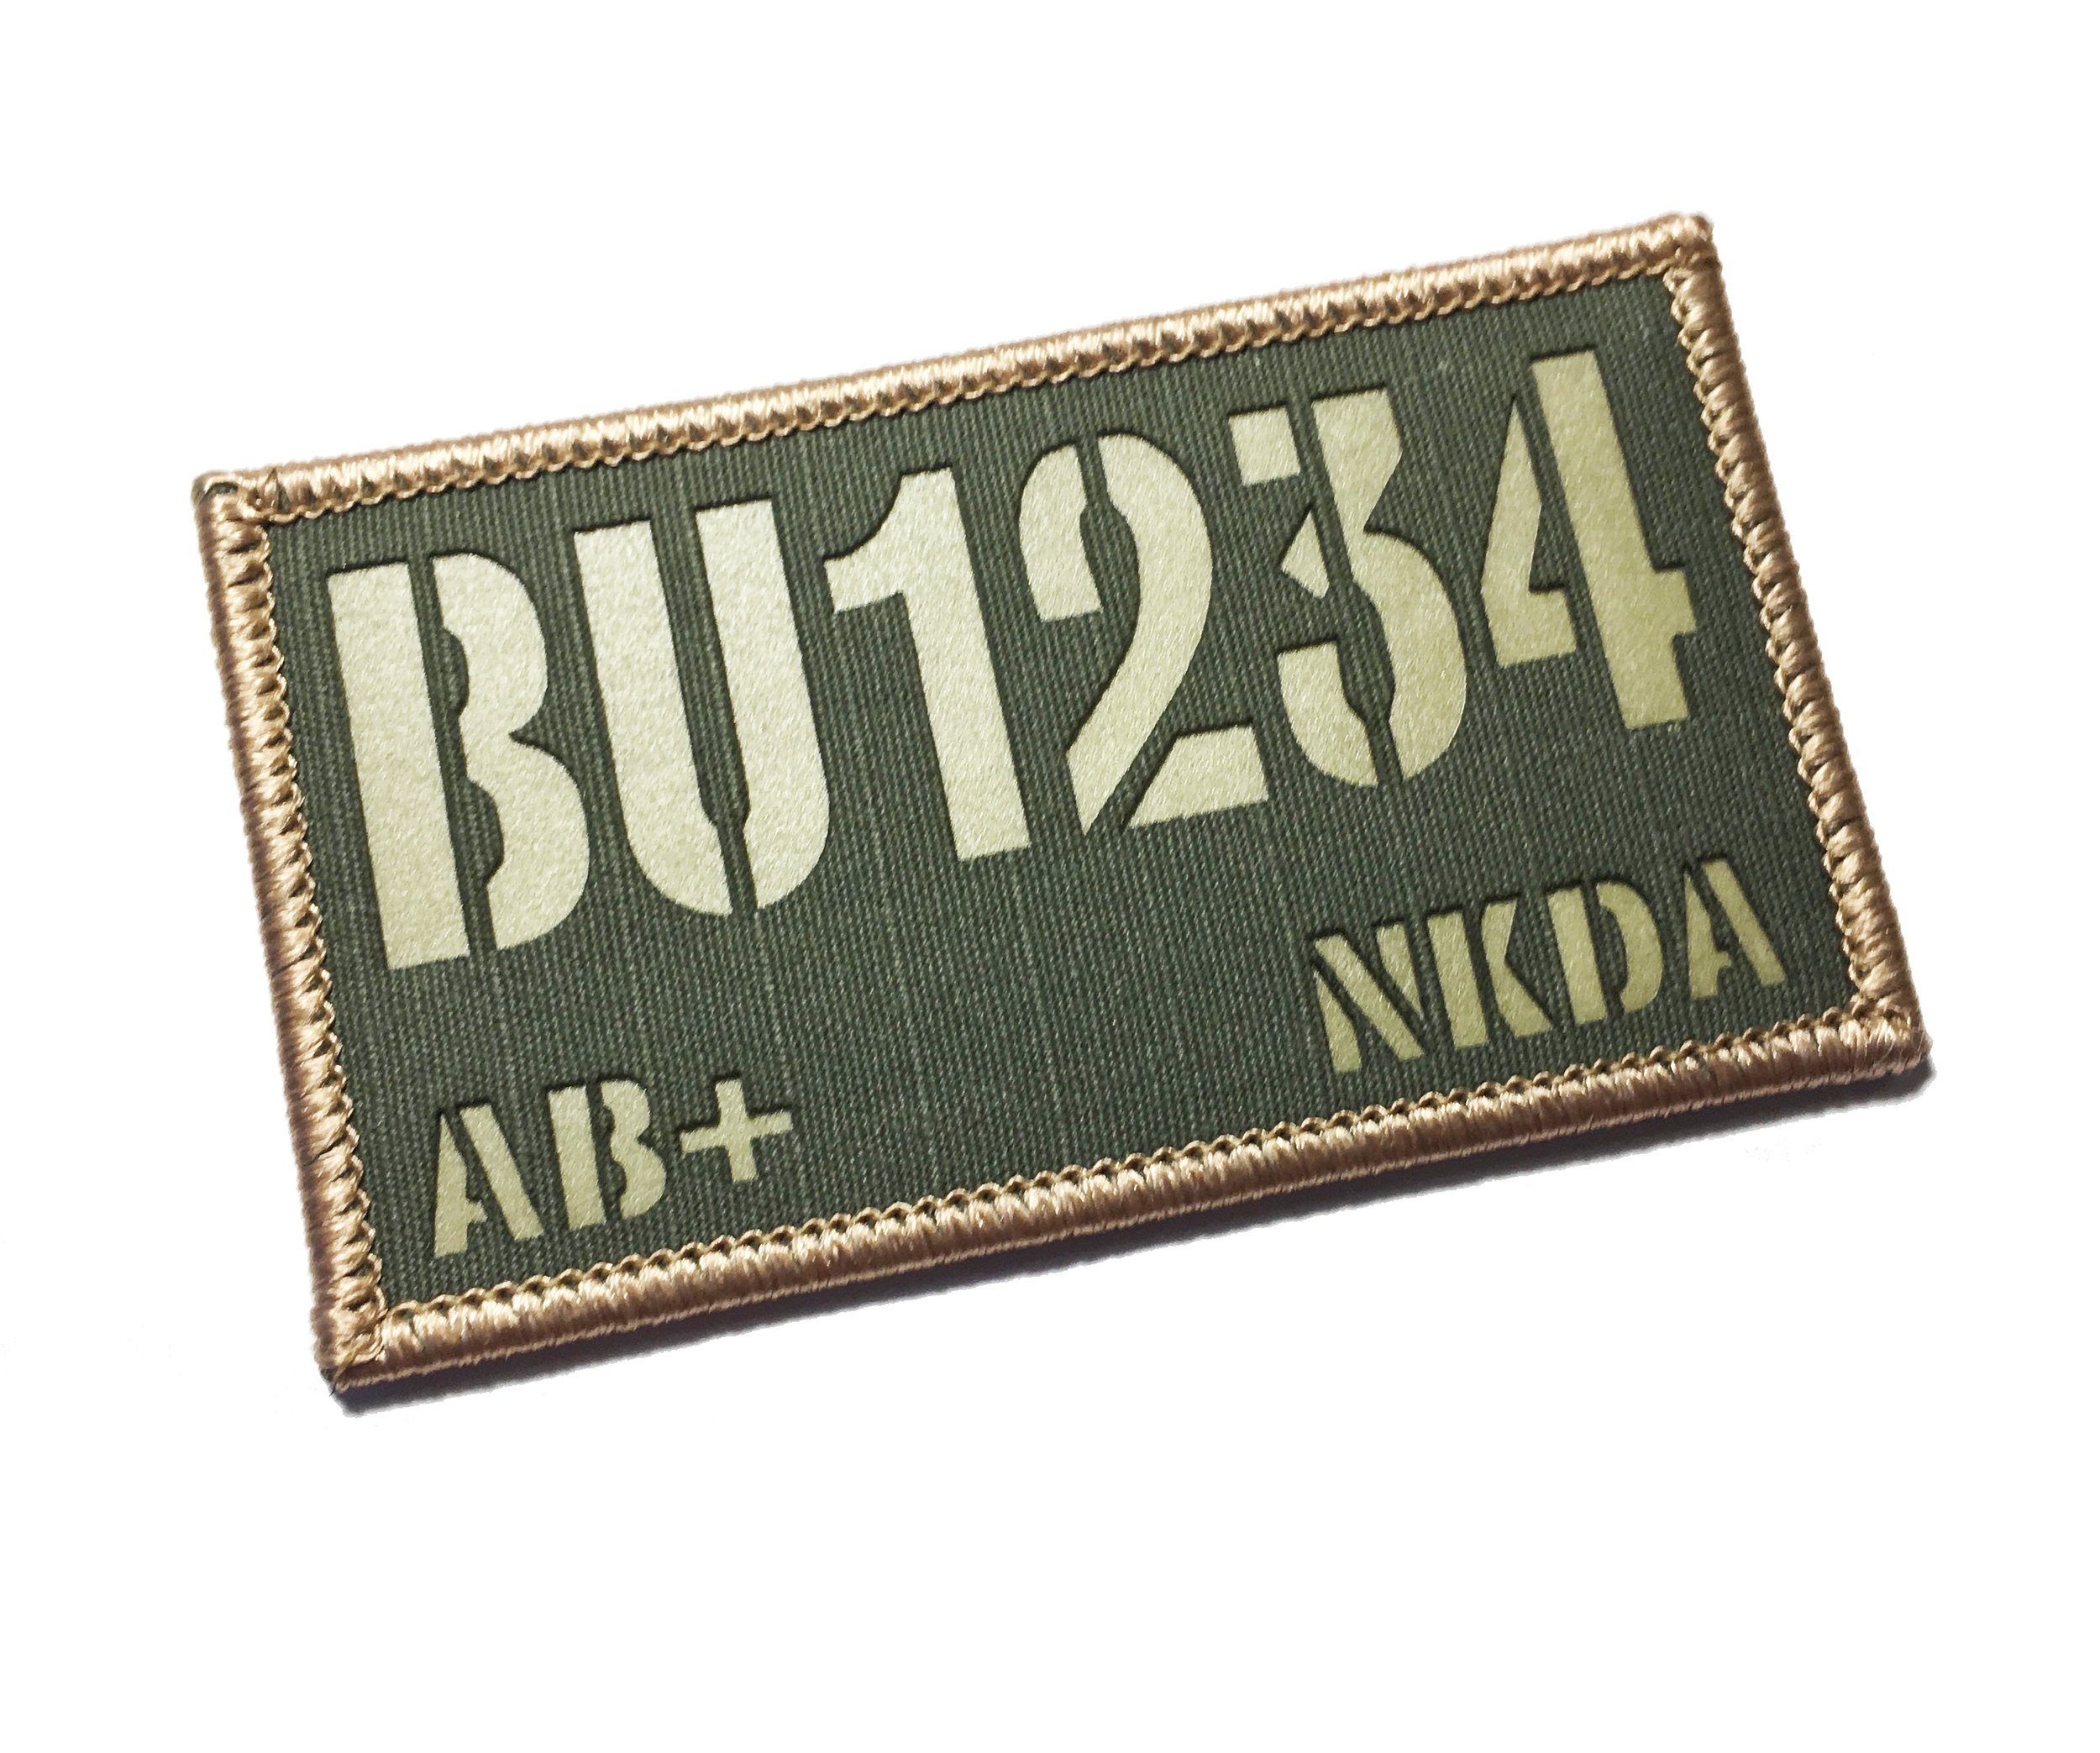 IR Goon Blackout 2x3.5 Morale Tactical Fastener Patch